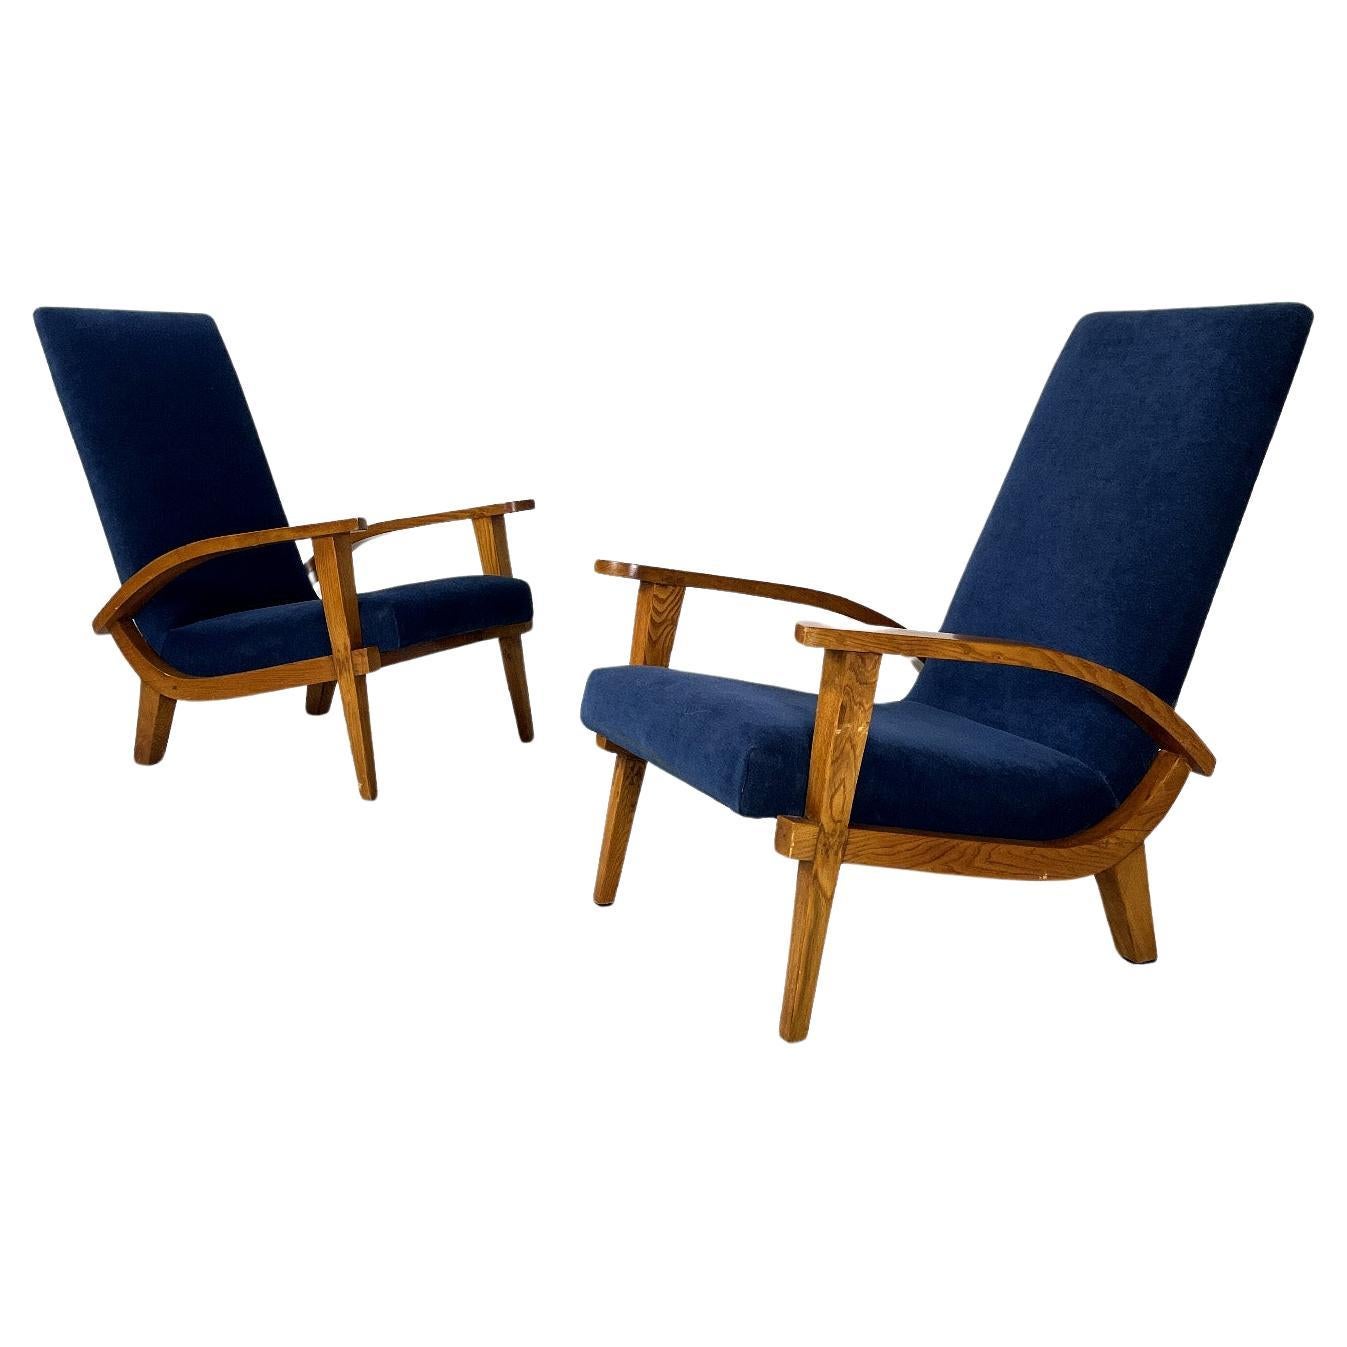 Italian mid-century modern wood and blue fabric armchairs, 1950s For Sale